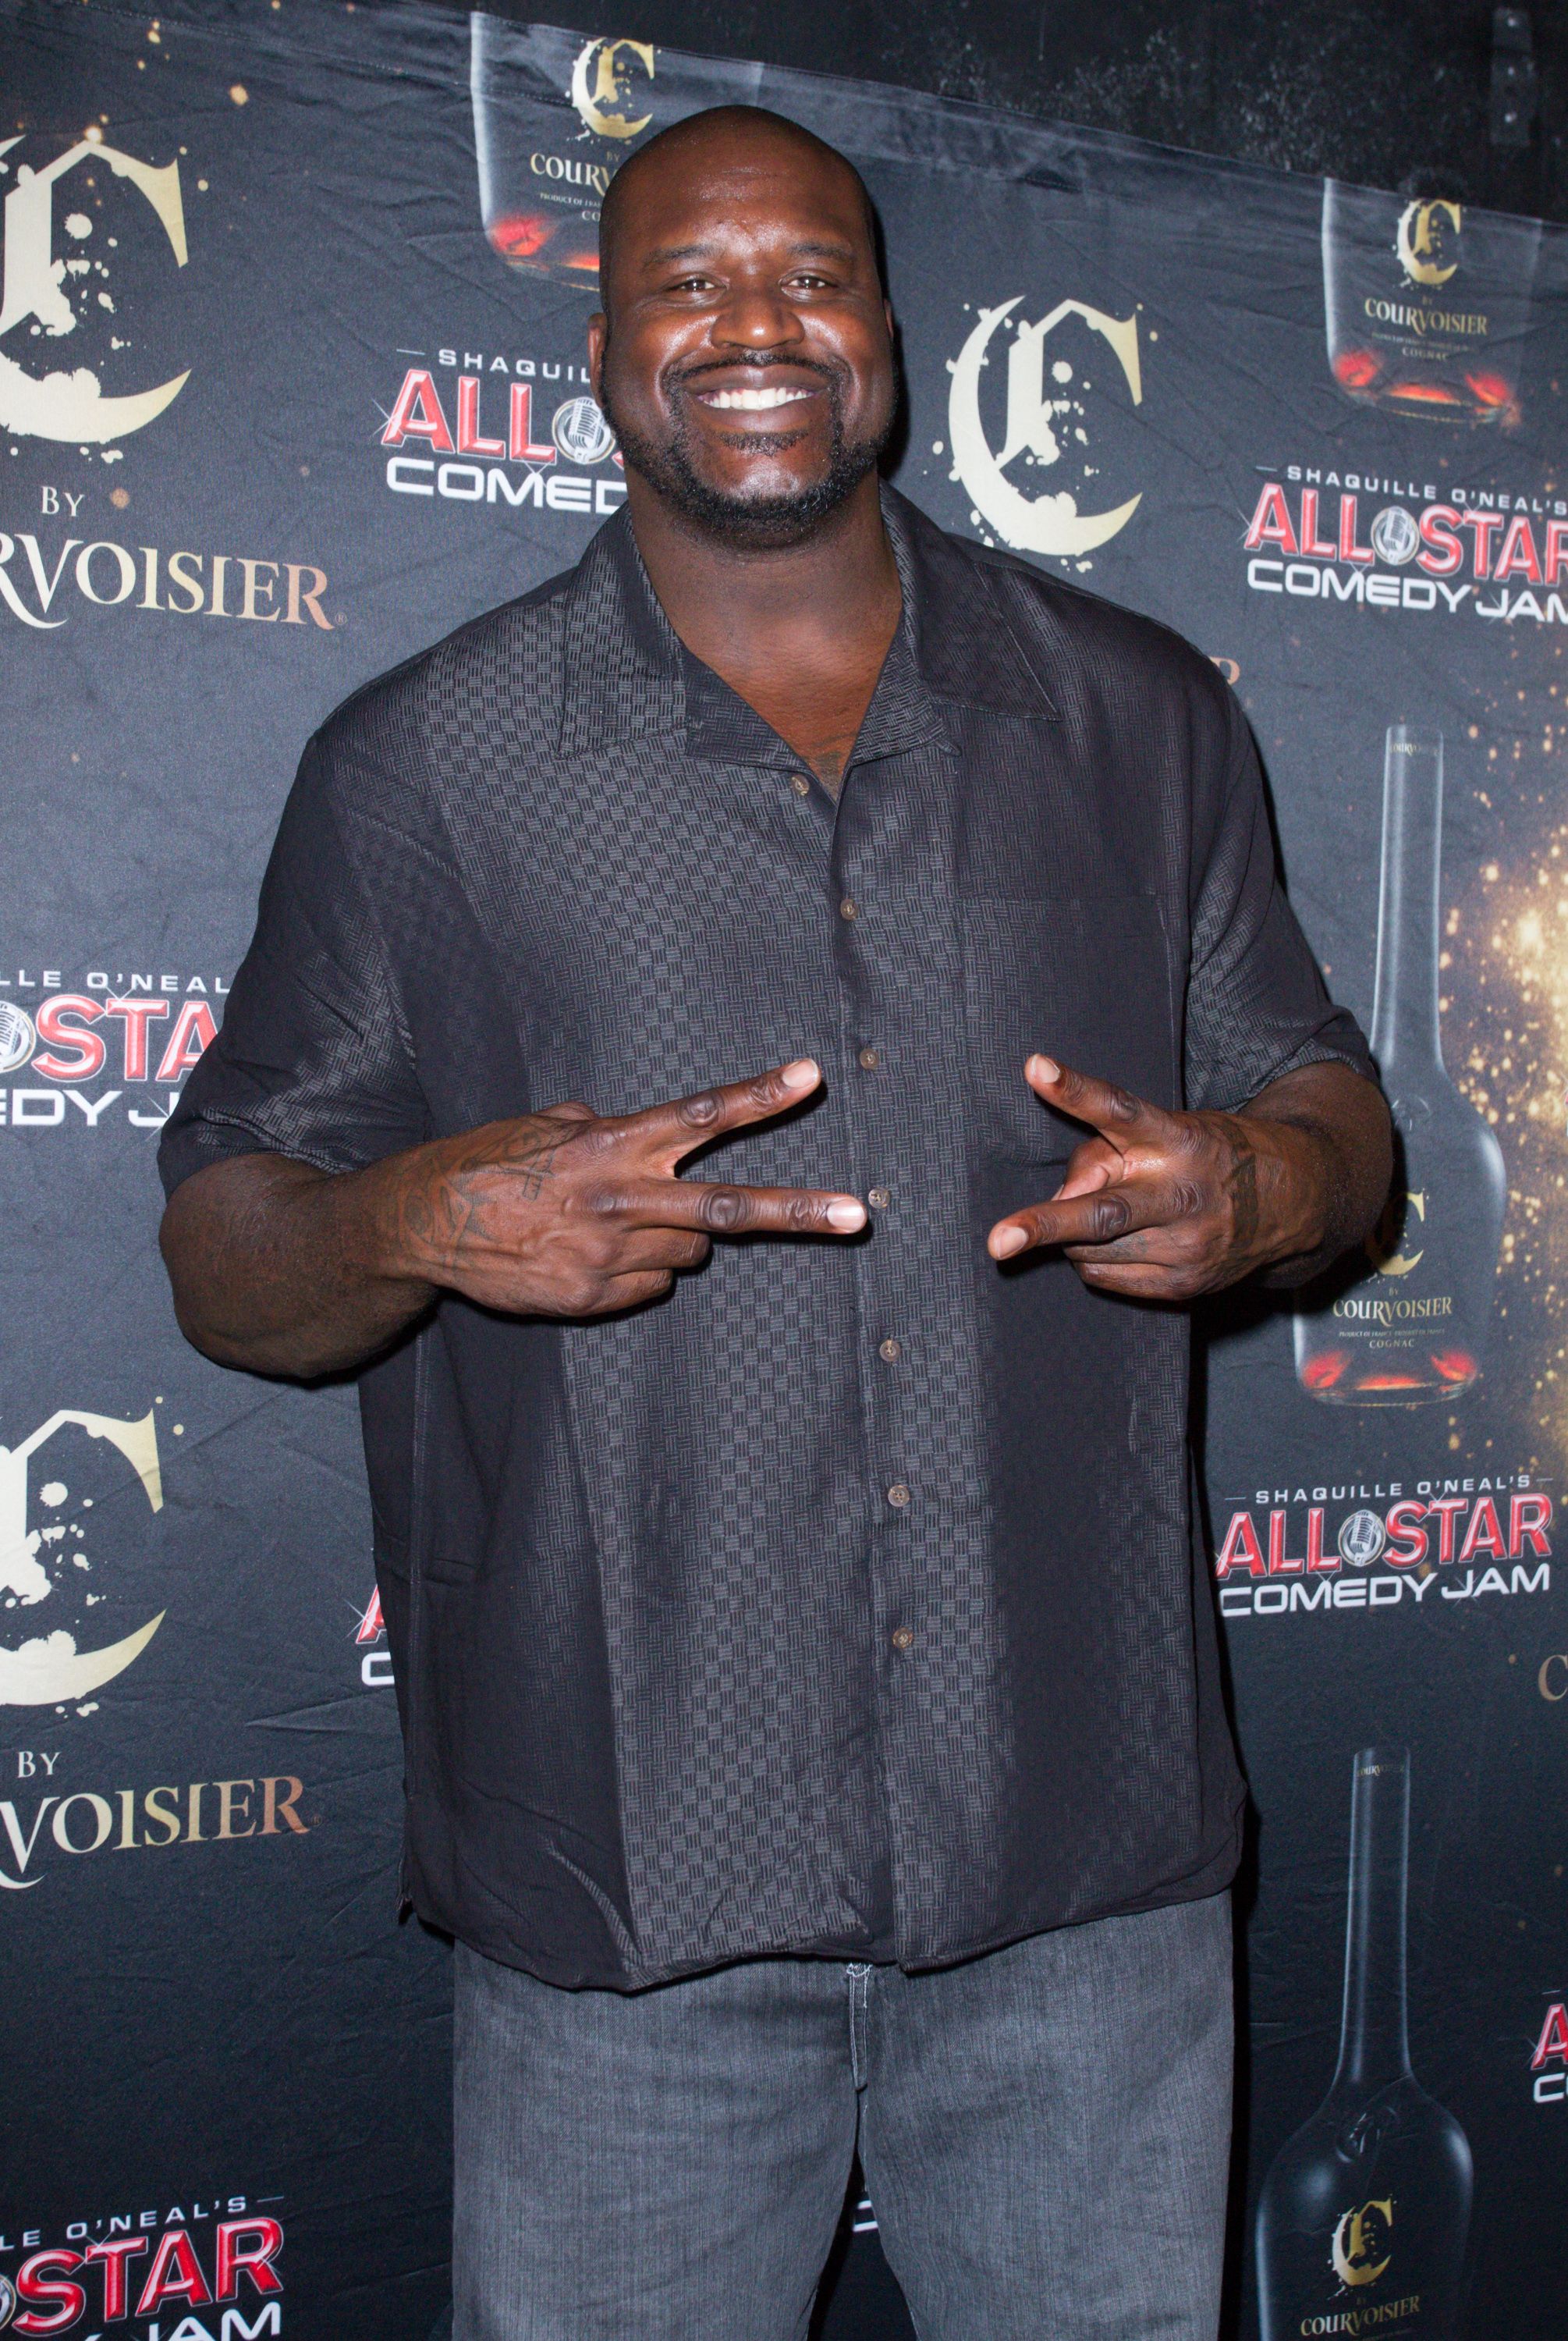 Shaquille O' Neal during the All Star Comedy Jam Holiday Celebration on December 15, 2012 in Miami, Florida. | Source: Getty Images